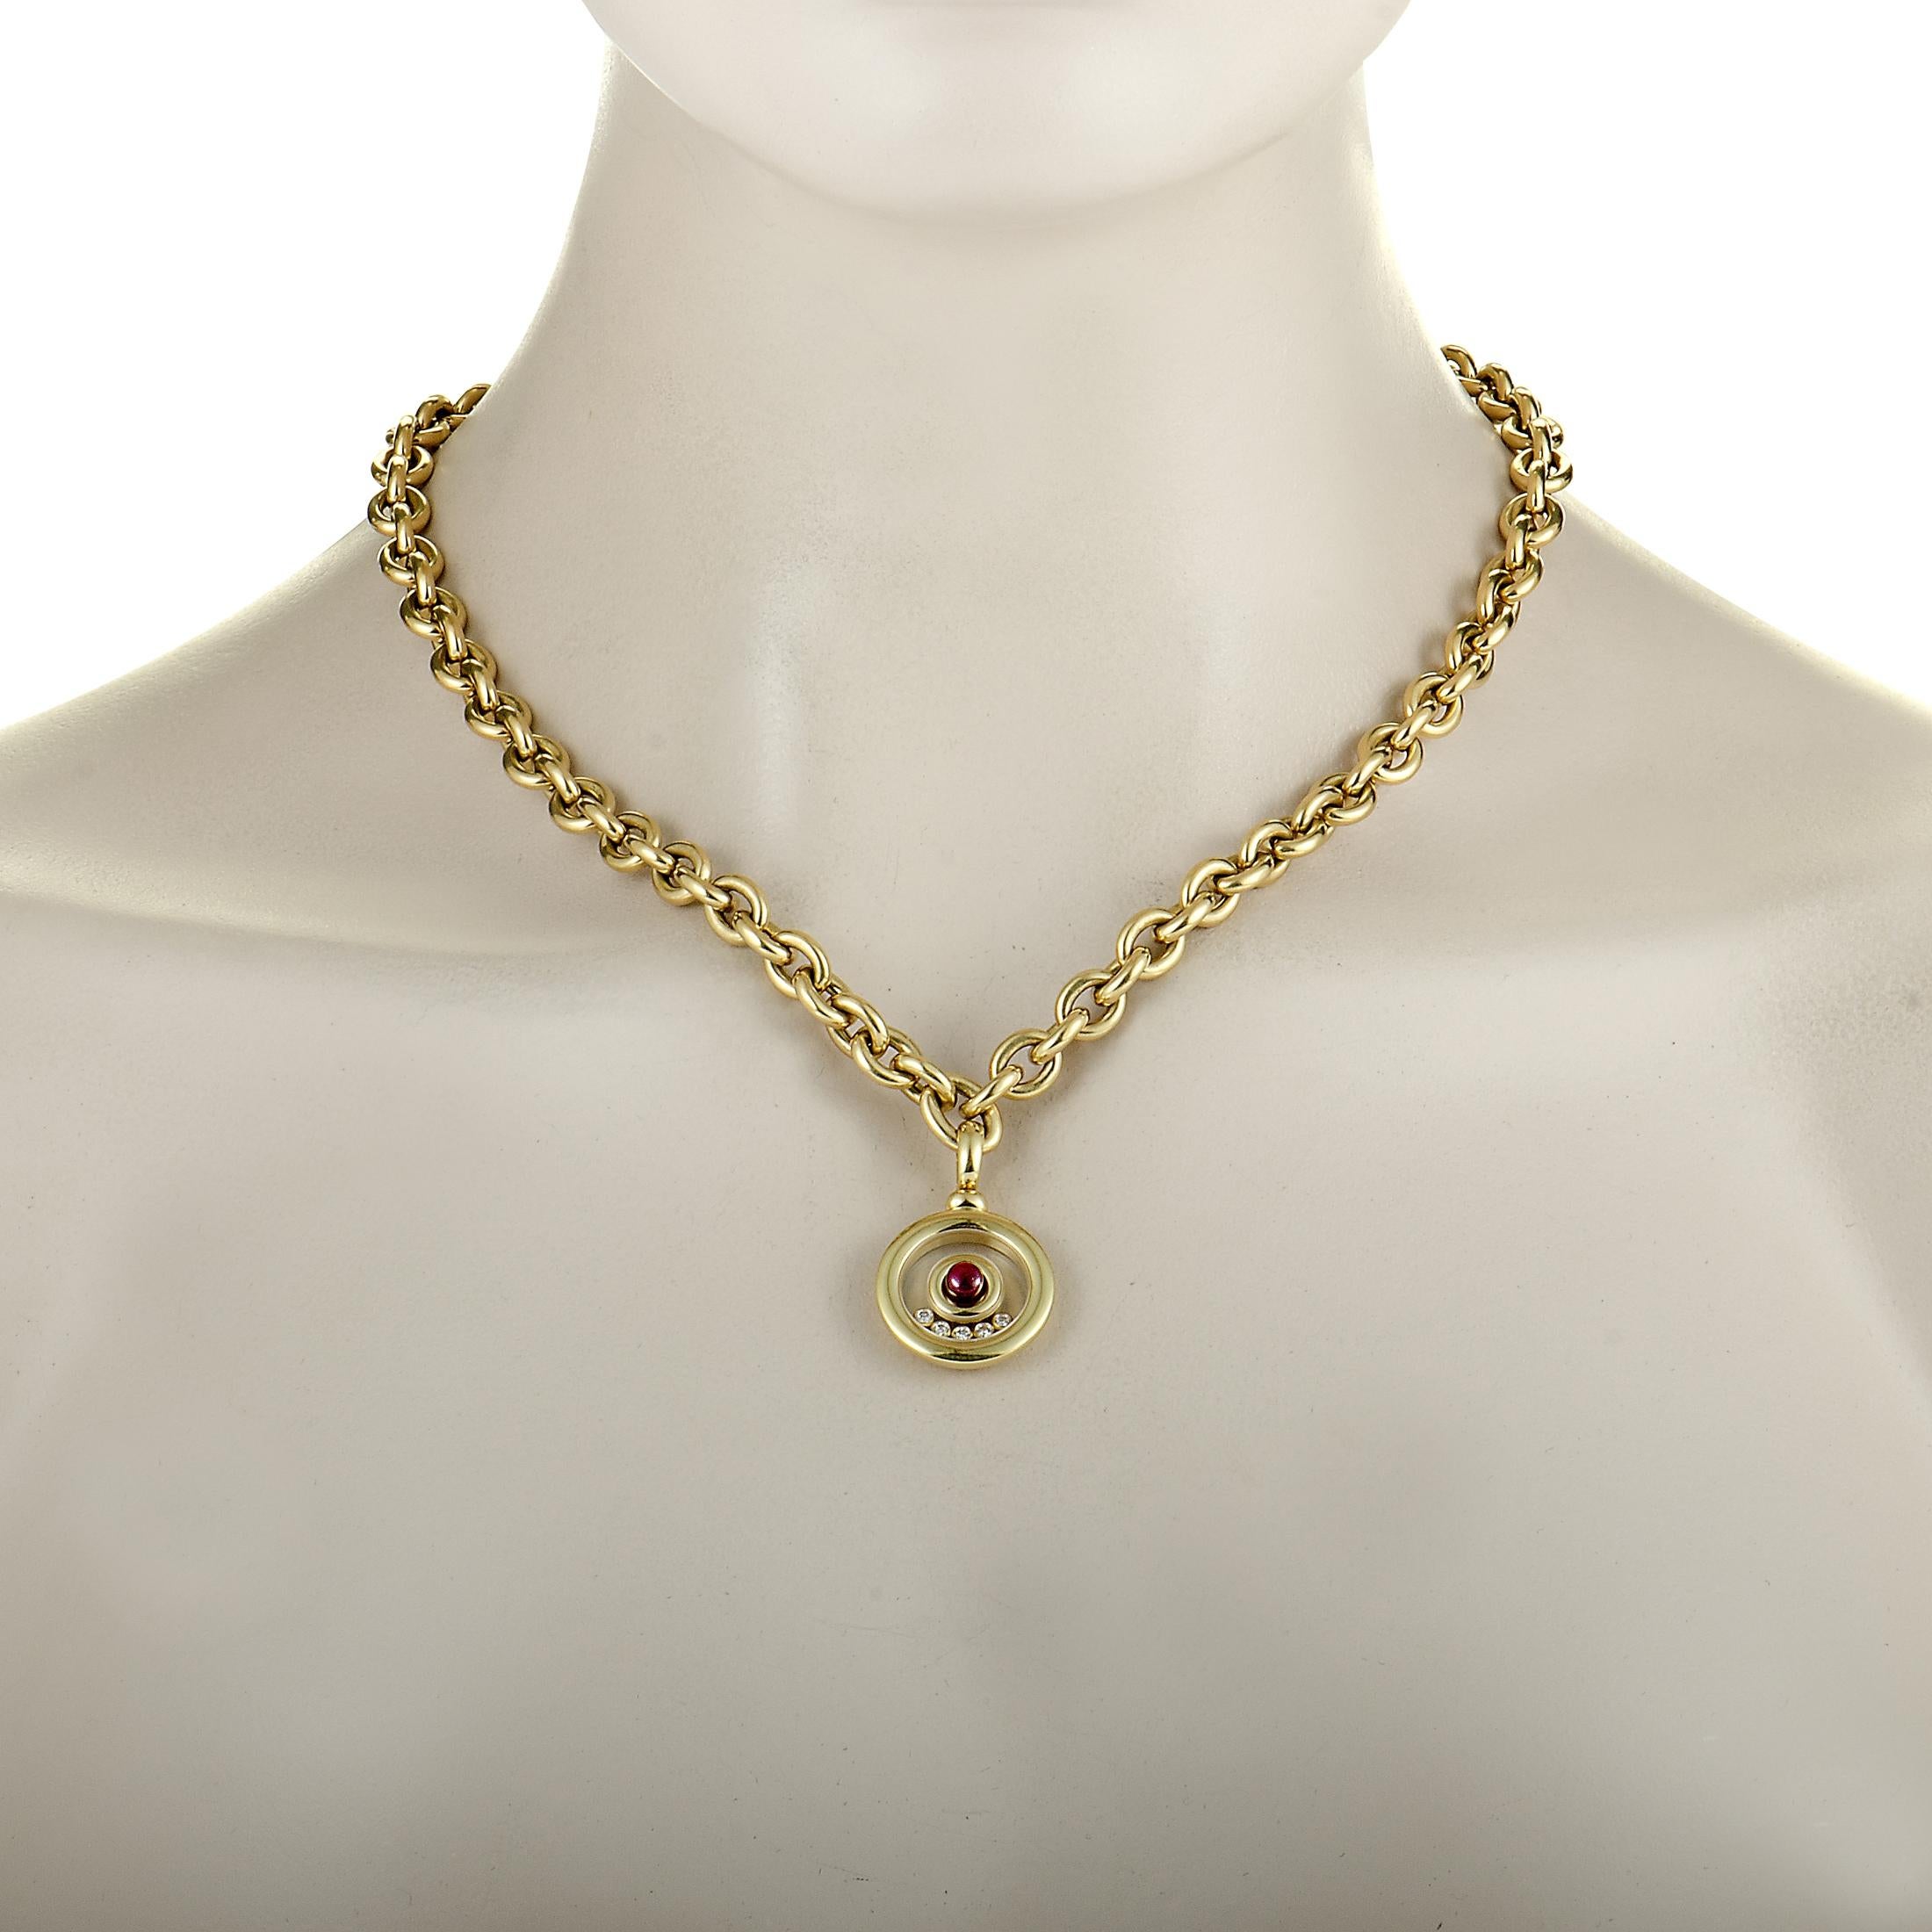 The Chopard “Happy Diamonds” vintage necklace is crafted from 18K yellow gold and embellished with a gemstone and floating diamonds. The necklace weighs 84.7 grams and features chain length of 18.00”, while the pendant measures 1.25” in length and